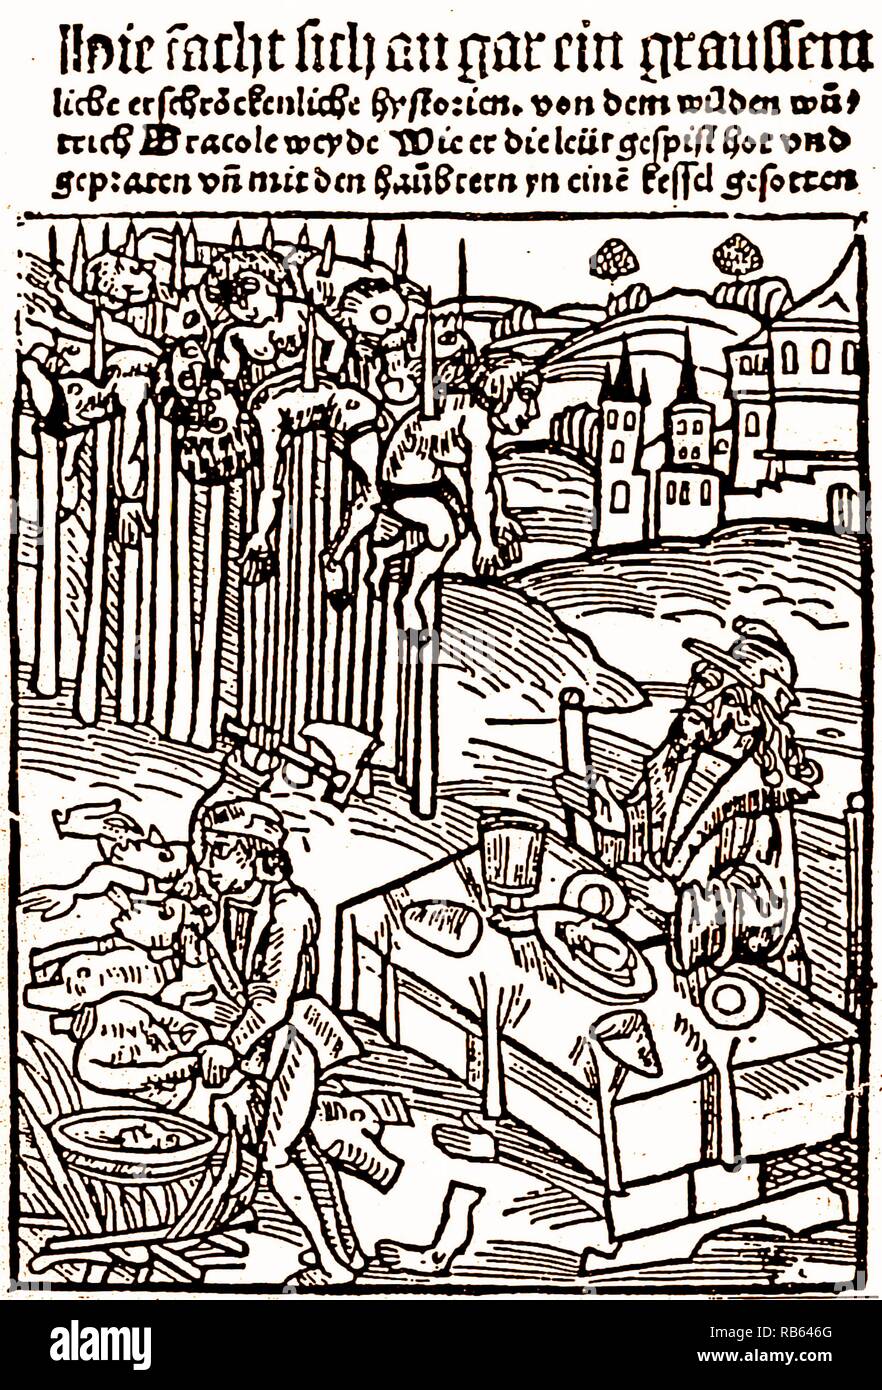 Woodcut of Vlad III, c. 1560, reputedly a copy of an original made during his lifetime. Vlad Prince of Wallachia (1431-1476/77), was a member of the House of Dr?cule?ti. He was also known by his patronymic name: Dracula. He was posthumously dubbed Vlad the Impaler due to his practice of impaling his enemies is part of his historical reputation. Stock Photo